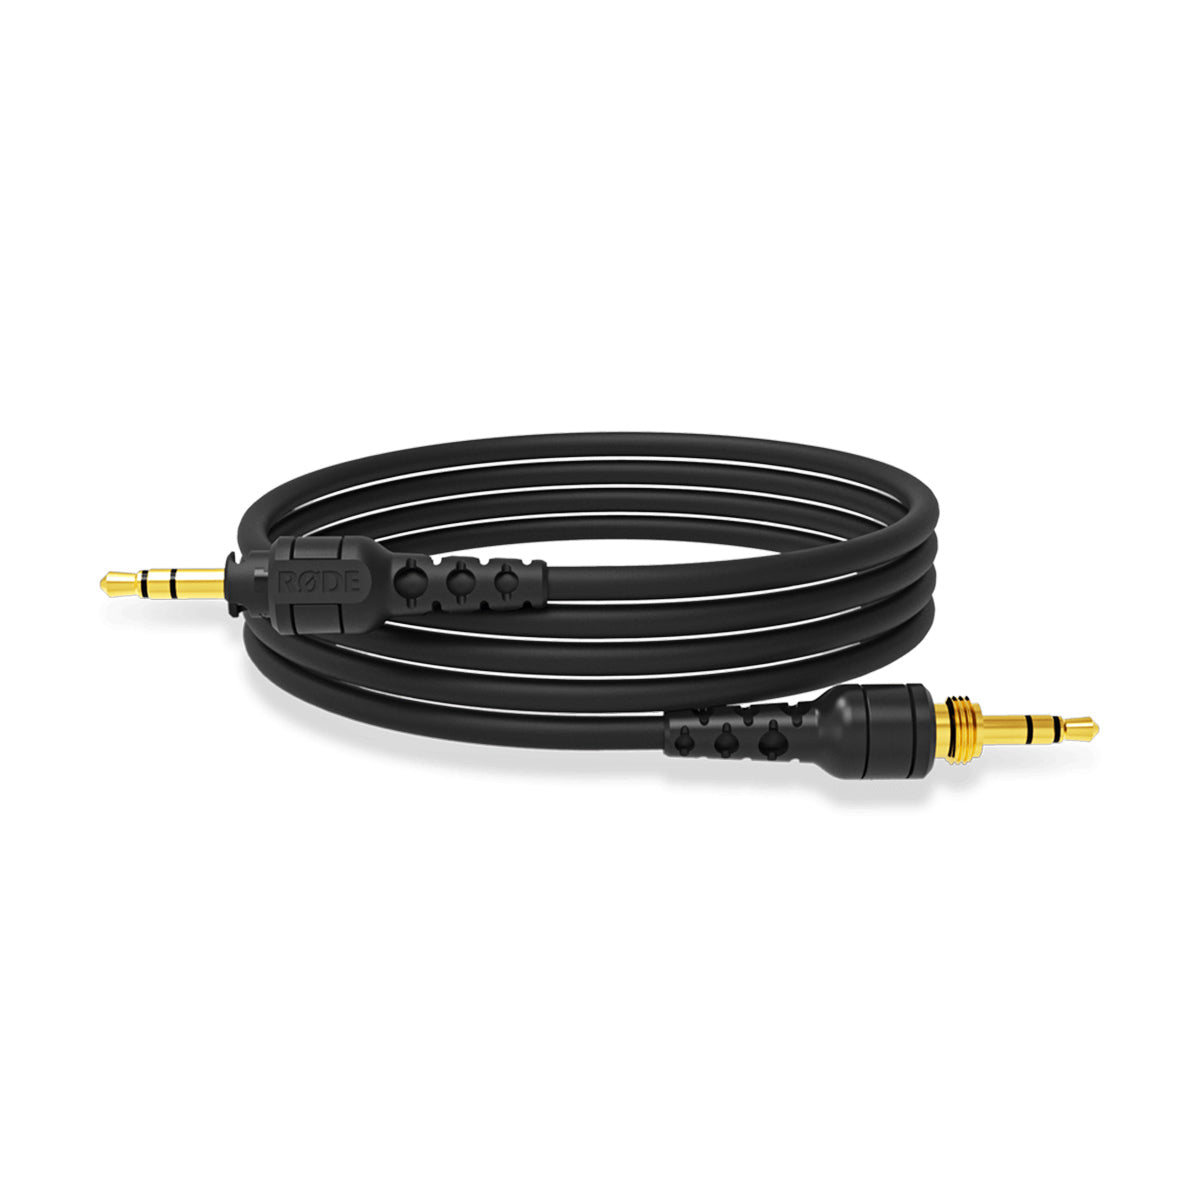 RODE NTH 1.2m Headphone Cable (Black)